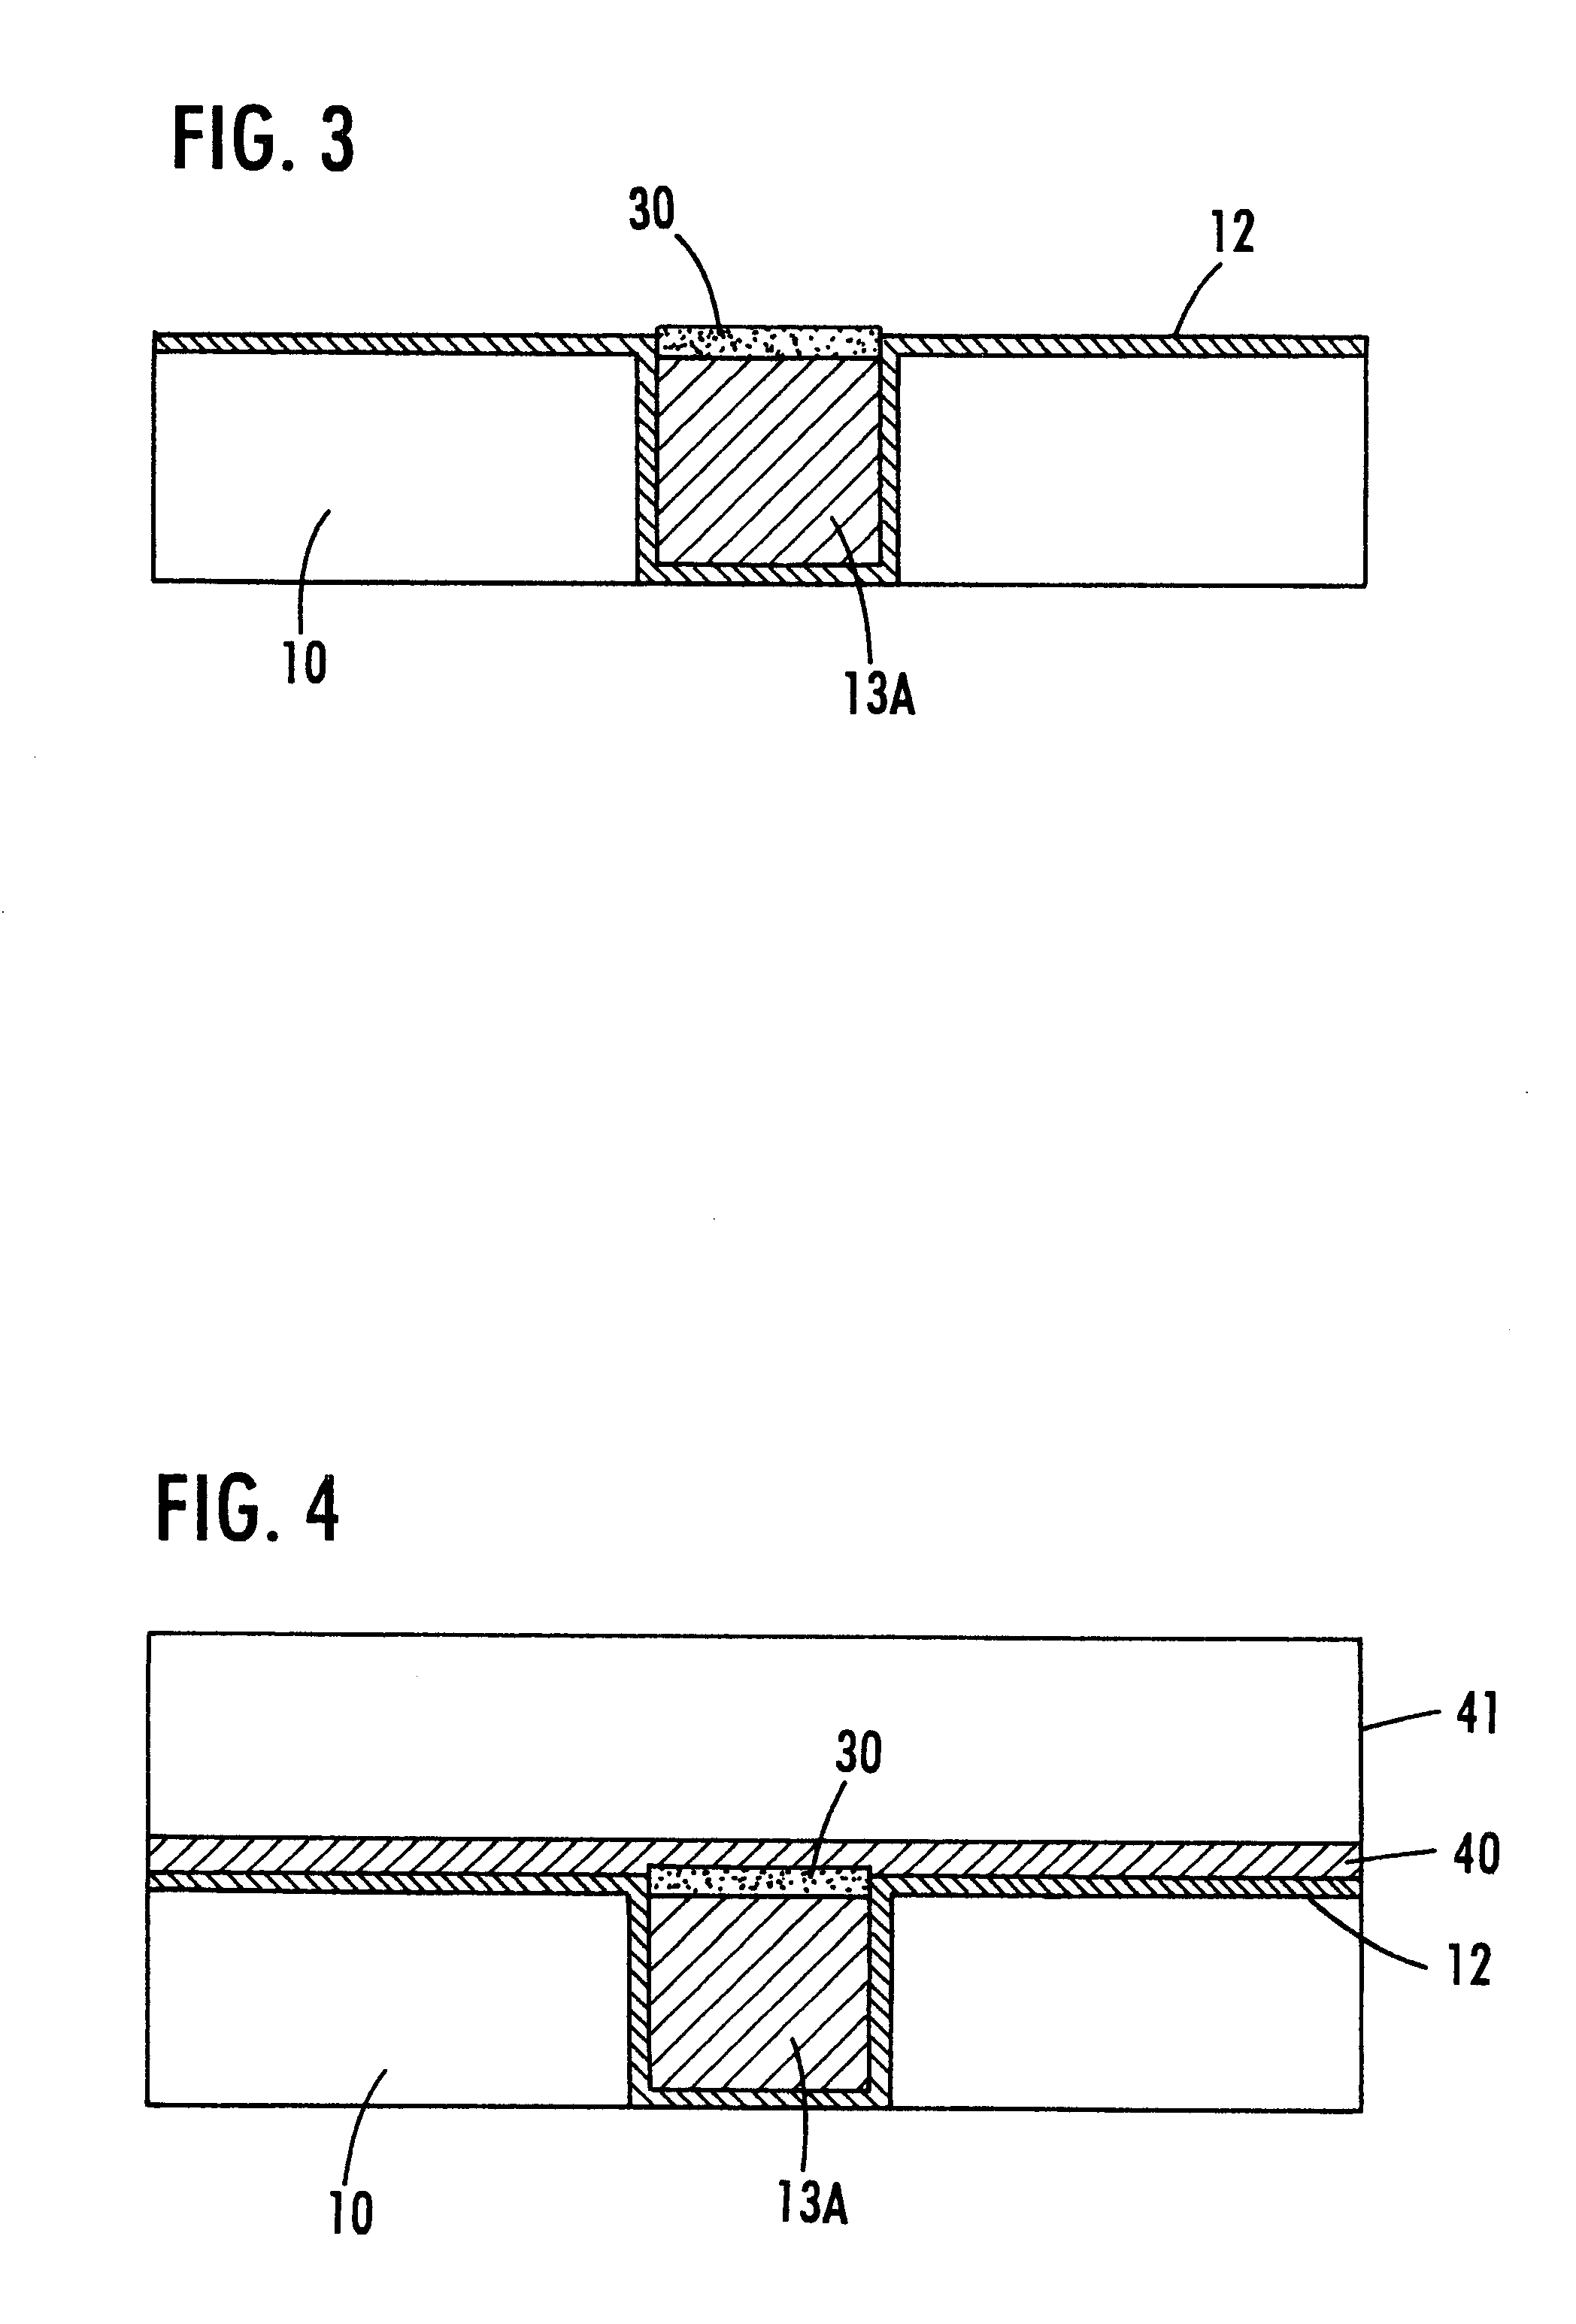 Method of improving adhesion of capping layers to copper interconnects